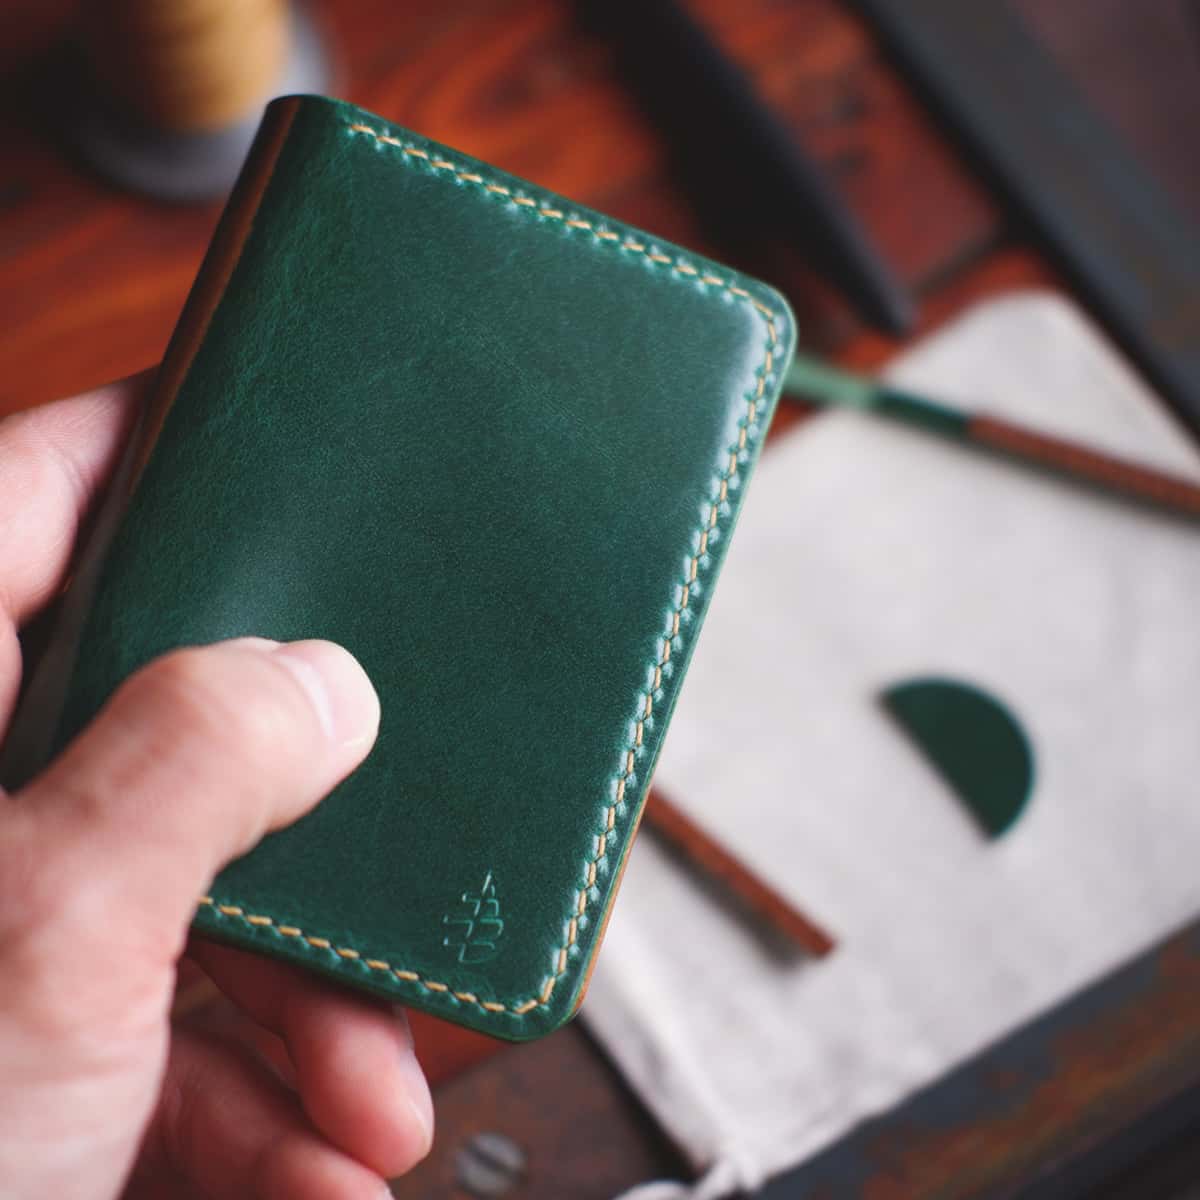 The Monterey 4-Slot Bifold wallet in Emerald Green Gaucho Oil leather held in hand